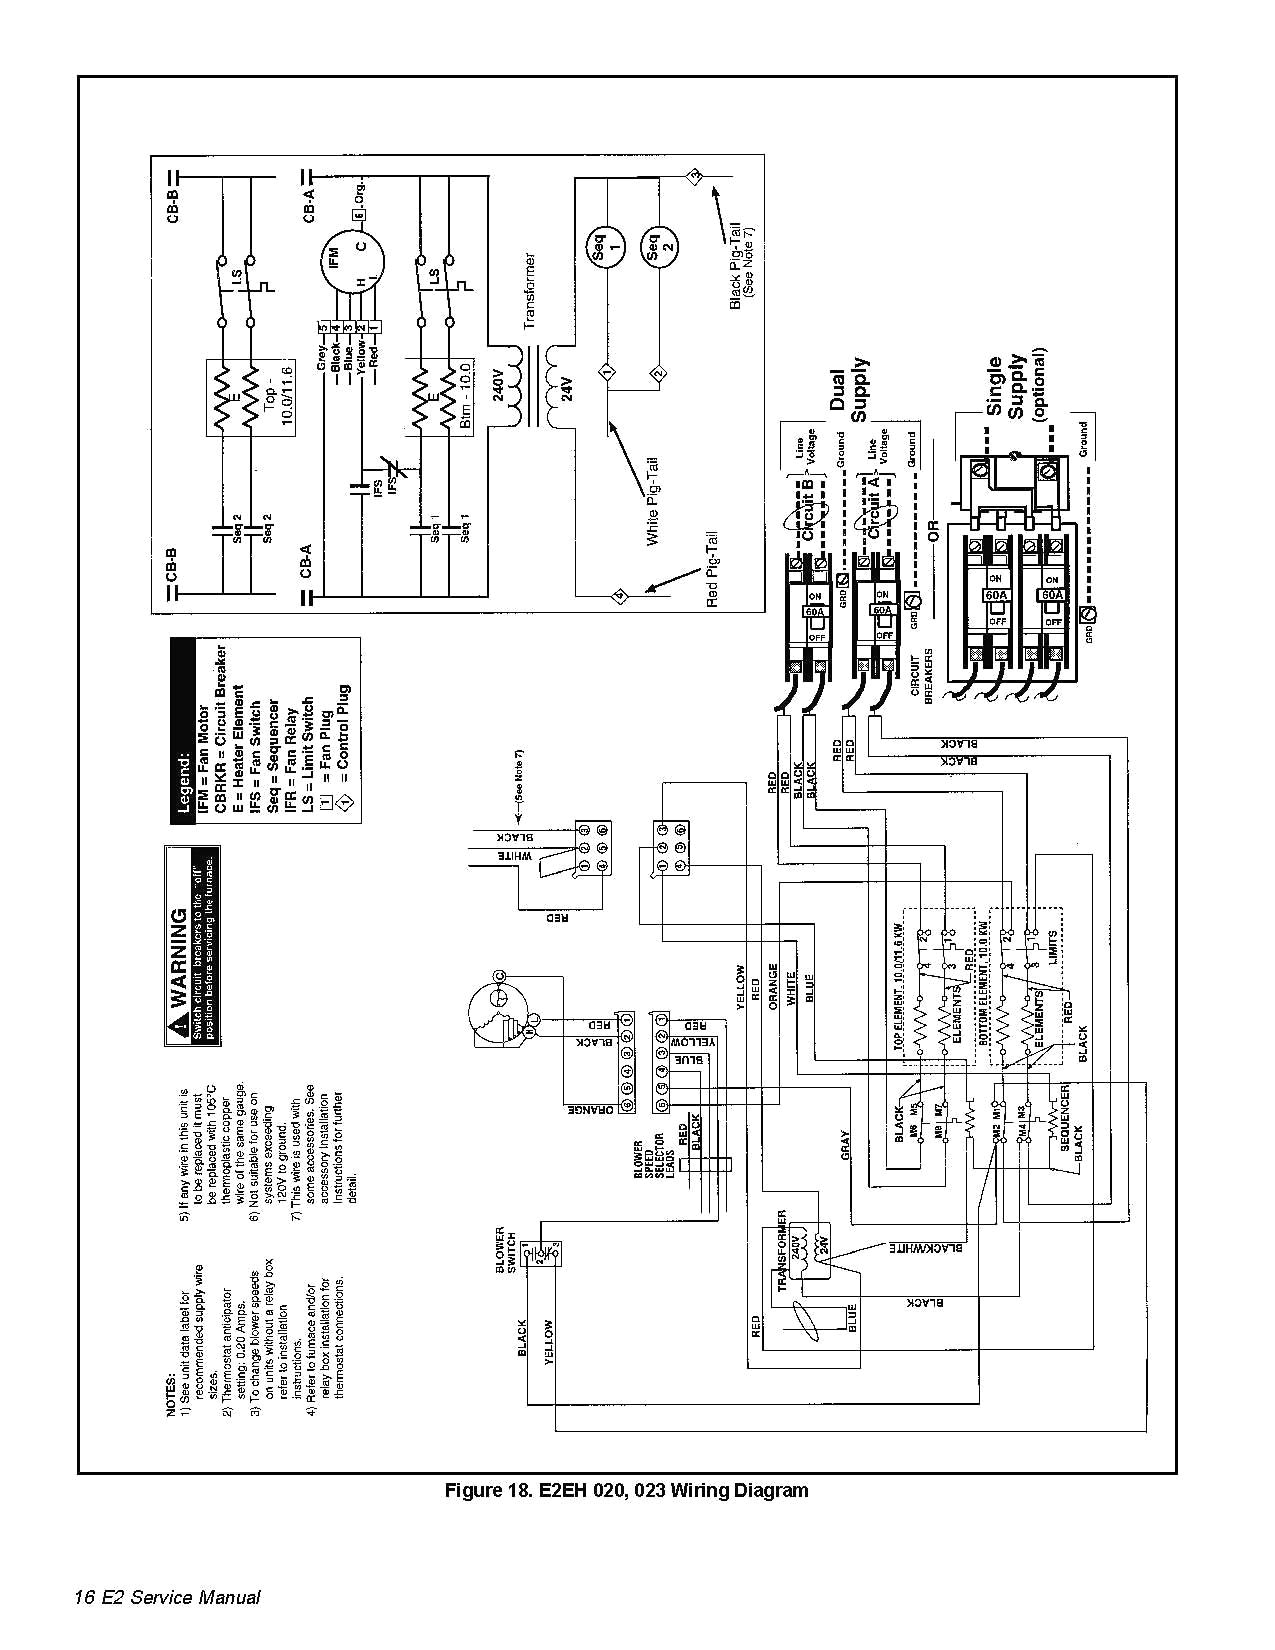 mobile home electric furnace wiring wiring diagram article review intertherm mobile home furnace wiring diagram mobile home furnace wiring diagram